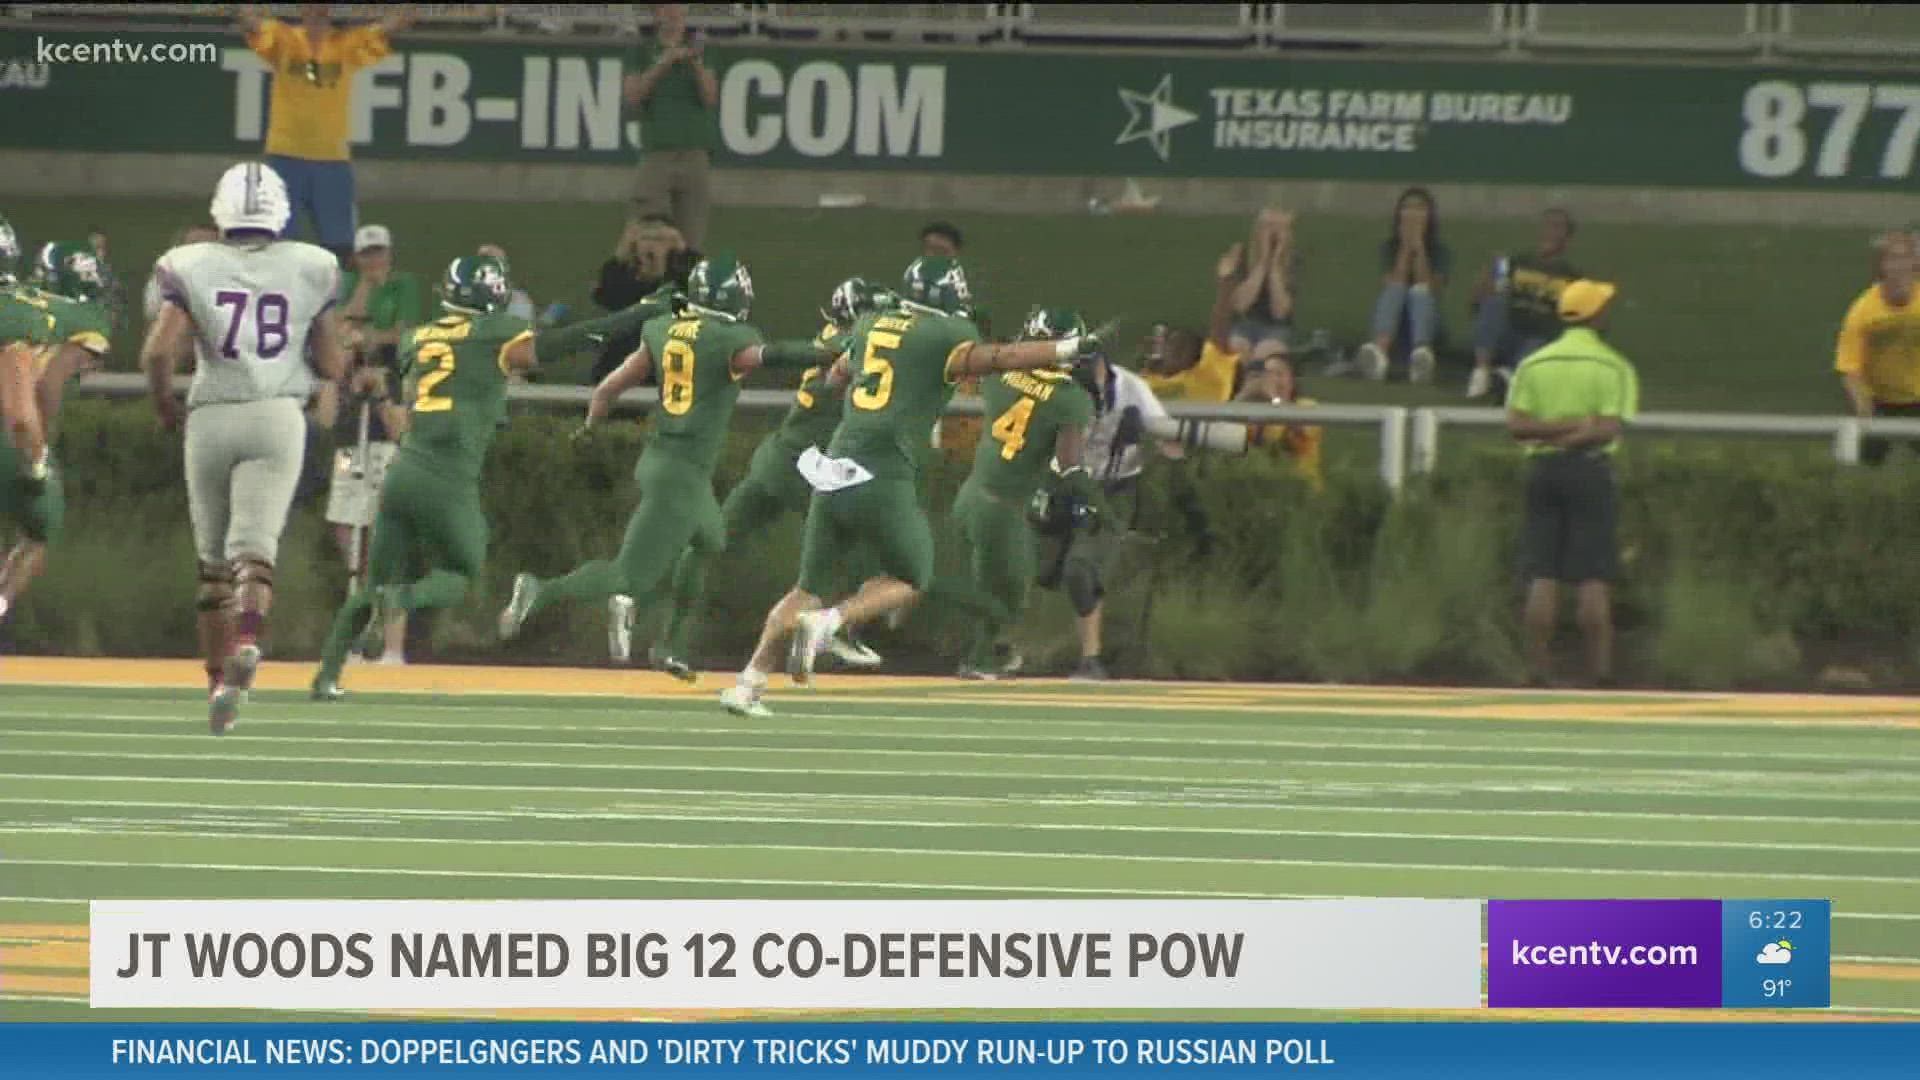 Baylor safety JT Woods was named the Big 12 co-defensive Player of the Week after a stellar performance on Saturday.